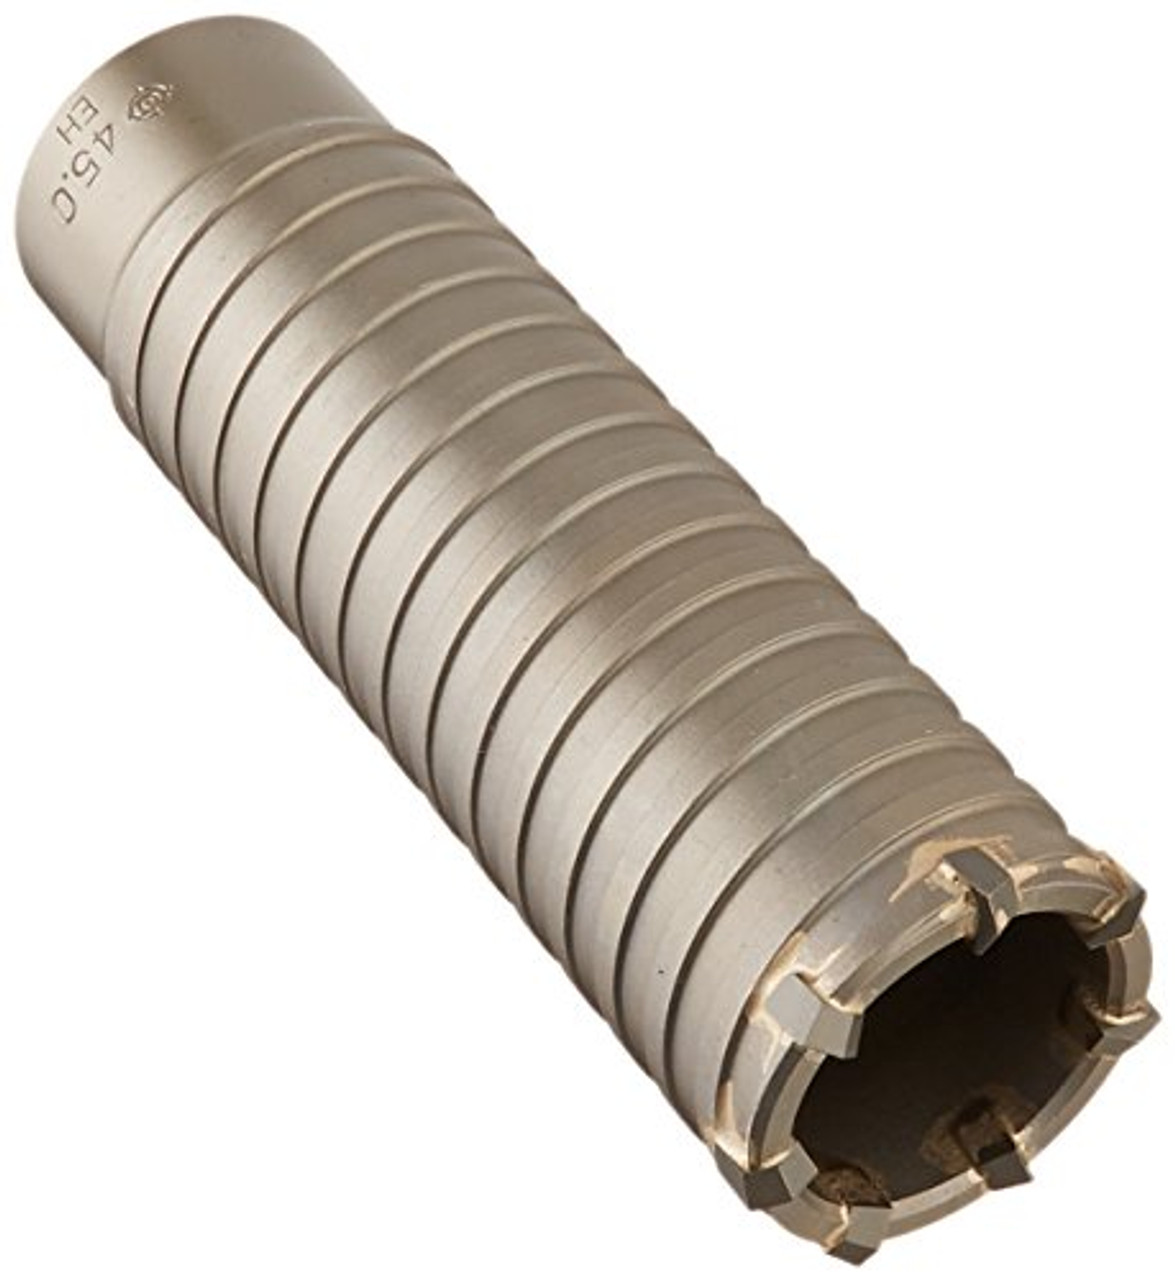 Hitachi 955154 1-3/4-Inch Hollow Core Bit for Rotary Hammers